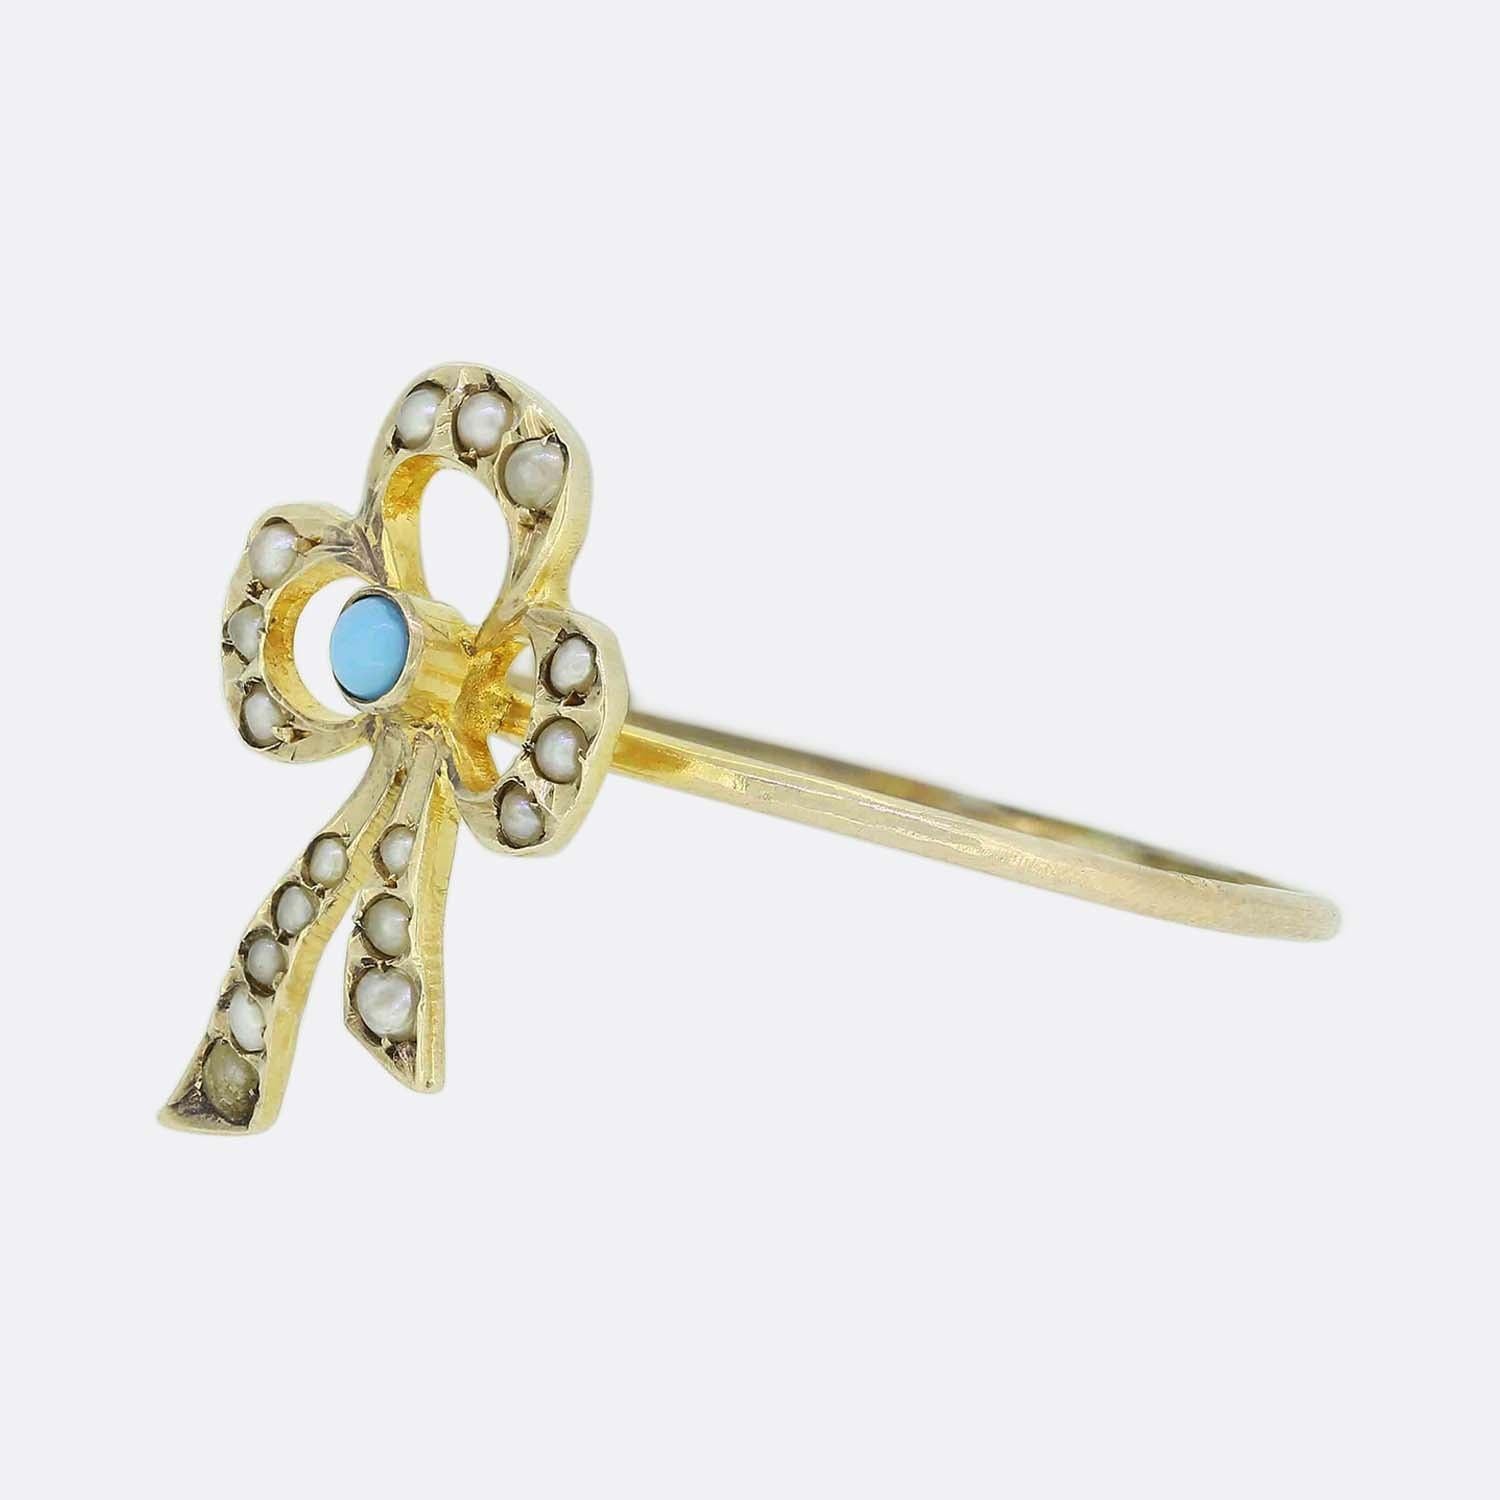 Here we have a charming Victorian turquoise and pearl ring. The head of the ring has been crafted into an open bowed shaped ribbon with a turquoise gemstone set at the centre and an array of seed pearls covering the rest of the motif. 

This piece